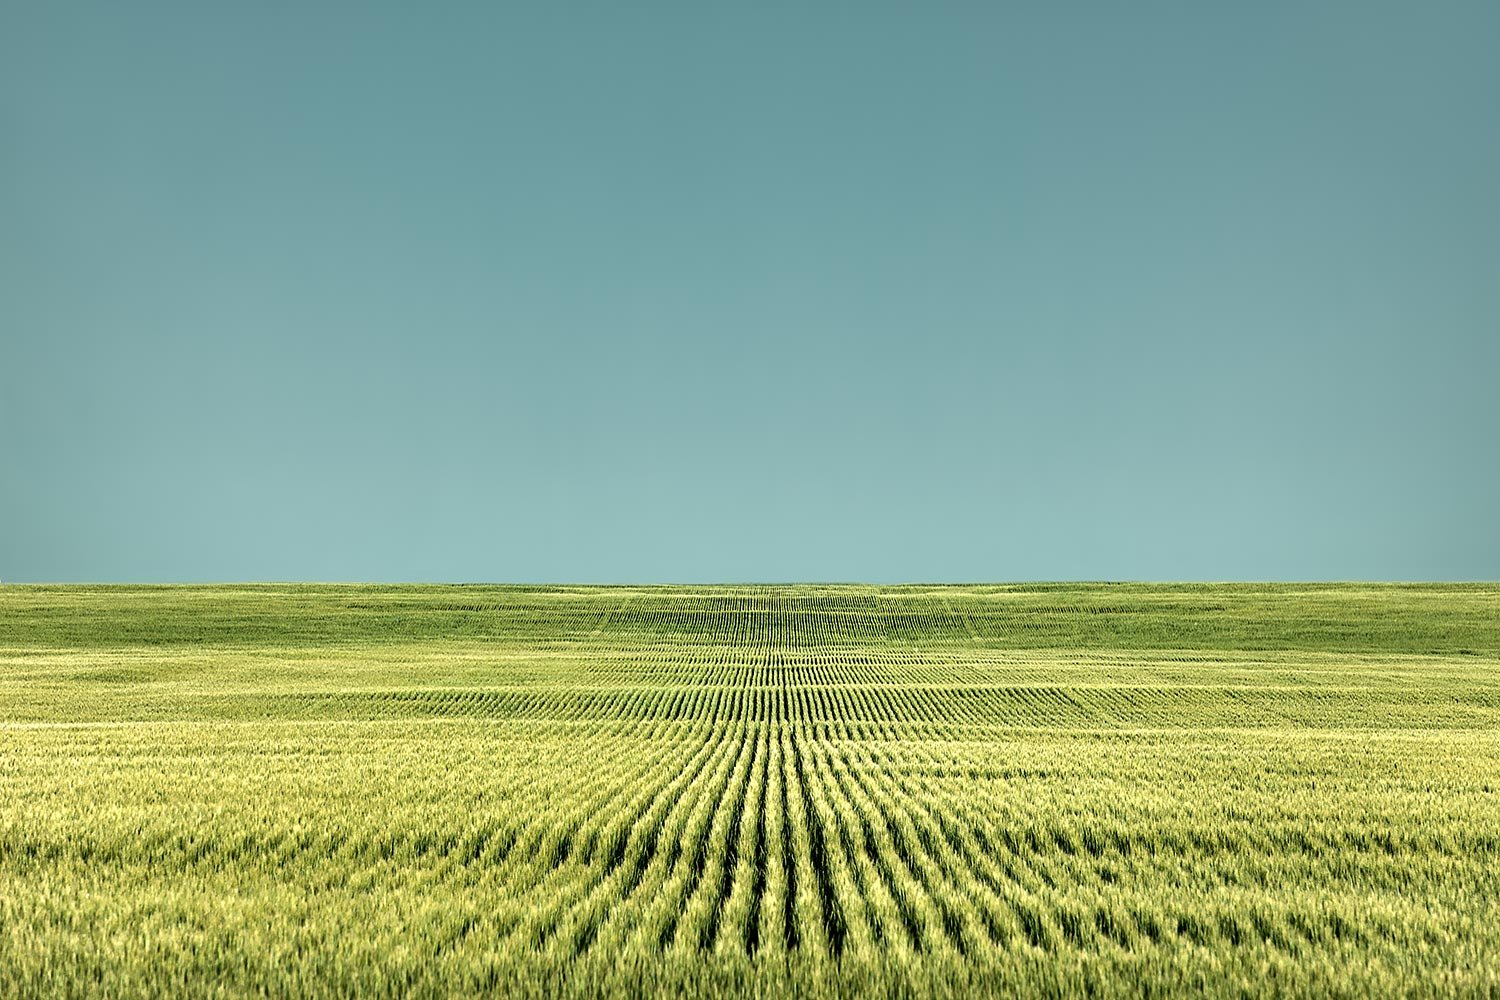 Endless Rows of Wheat